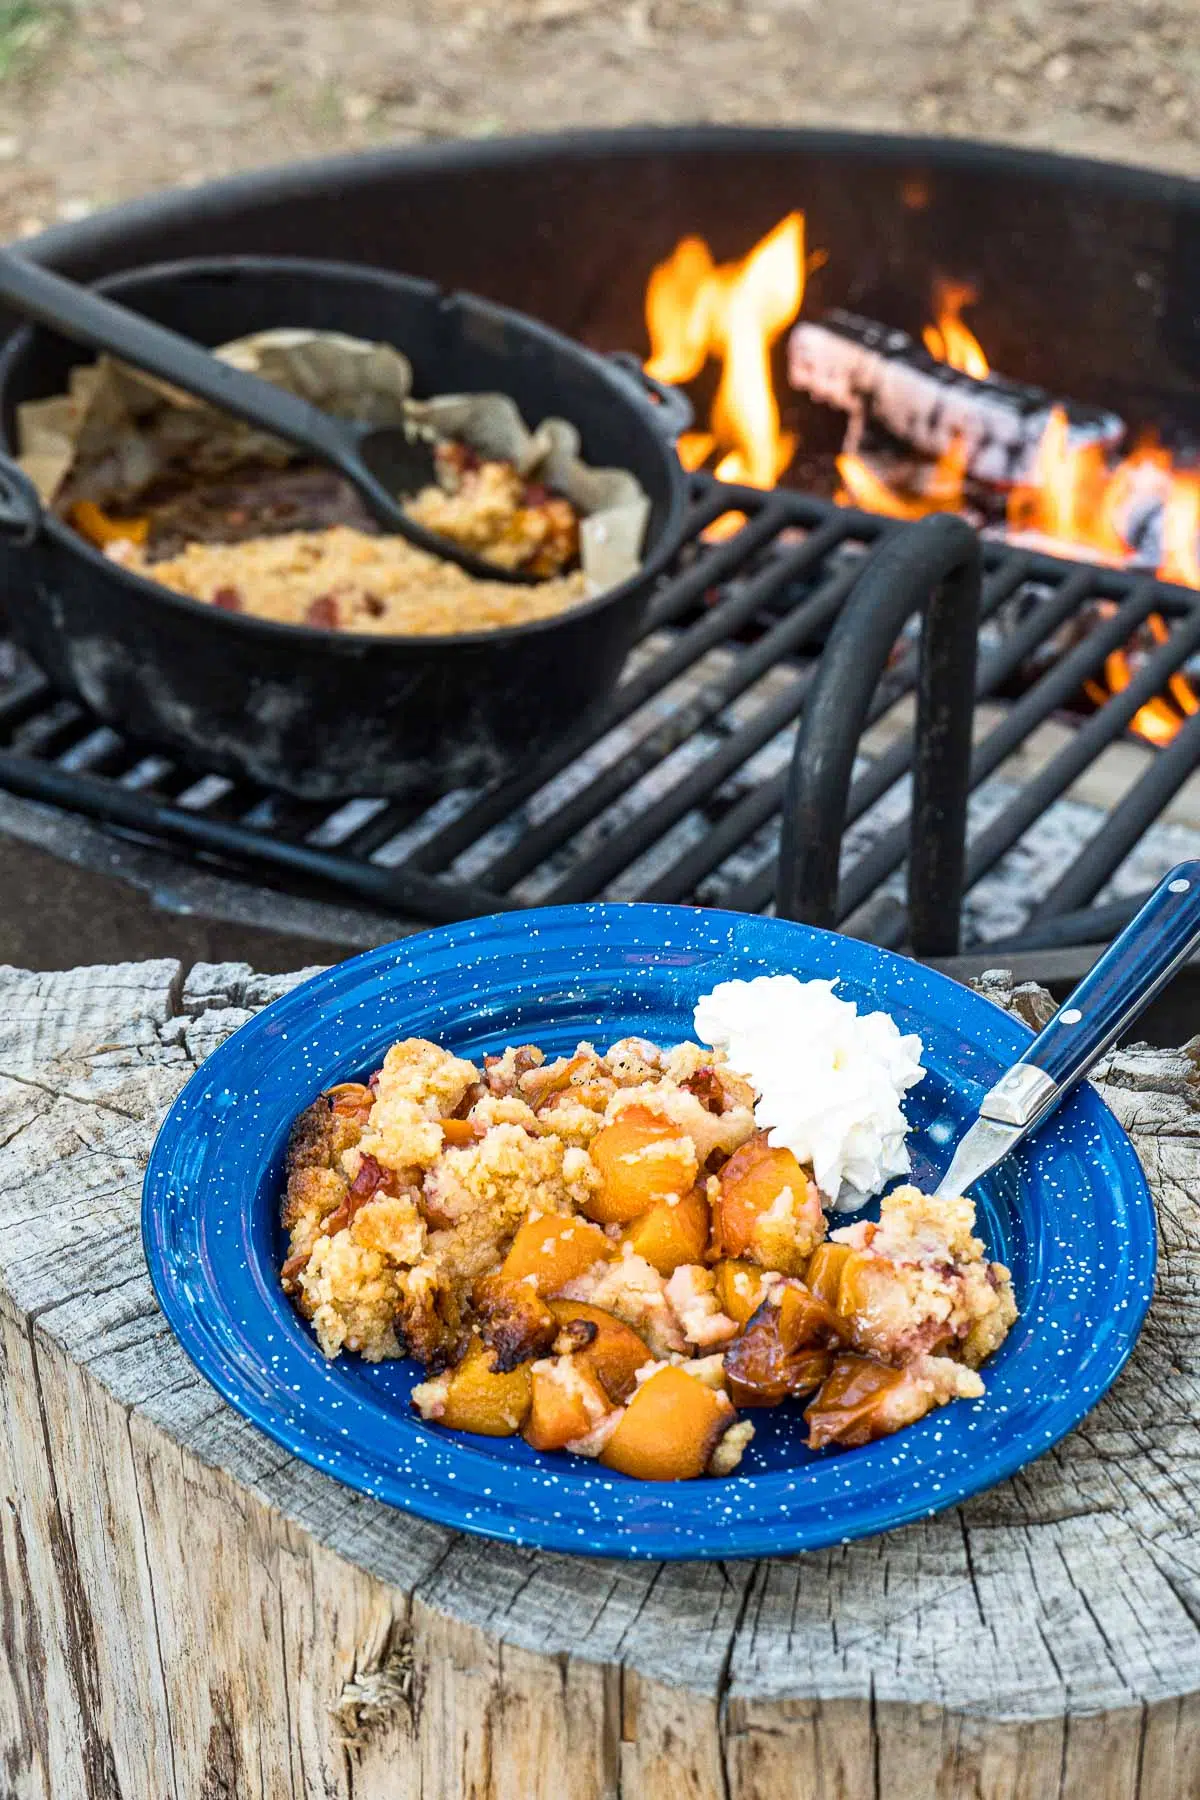 Peach cobbler on a plate with a campfire in the background